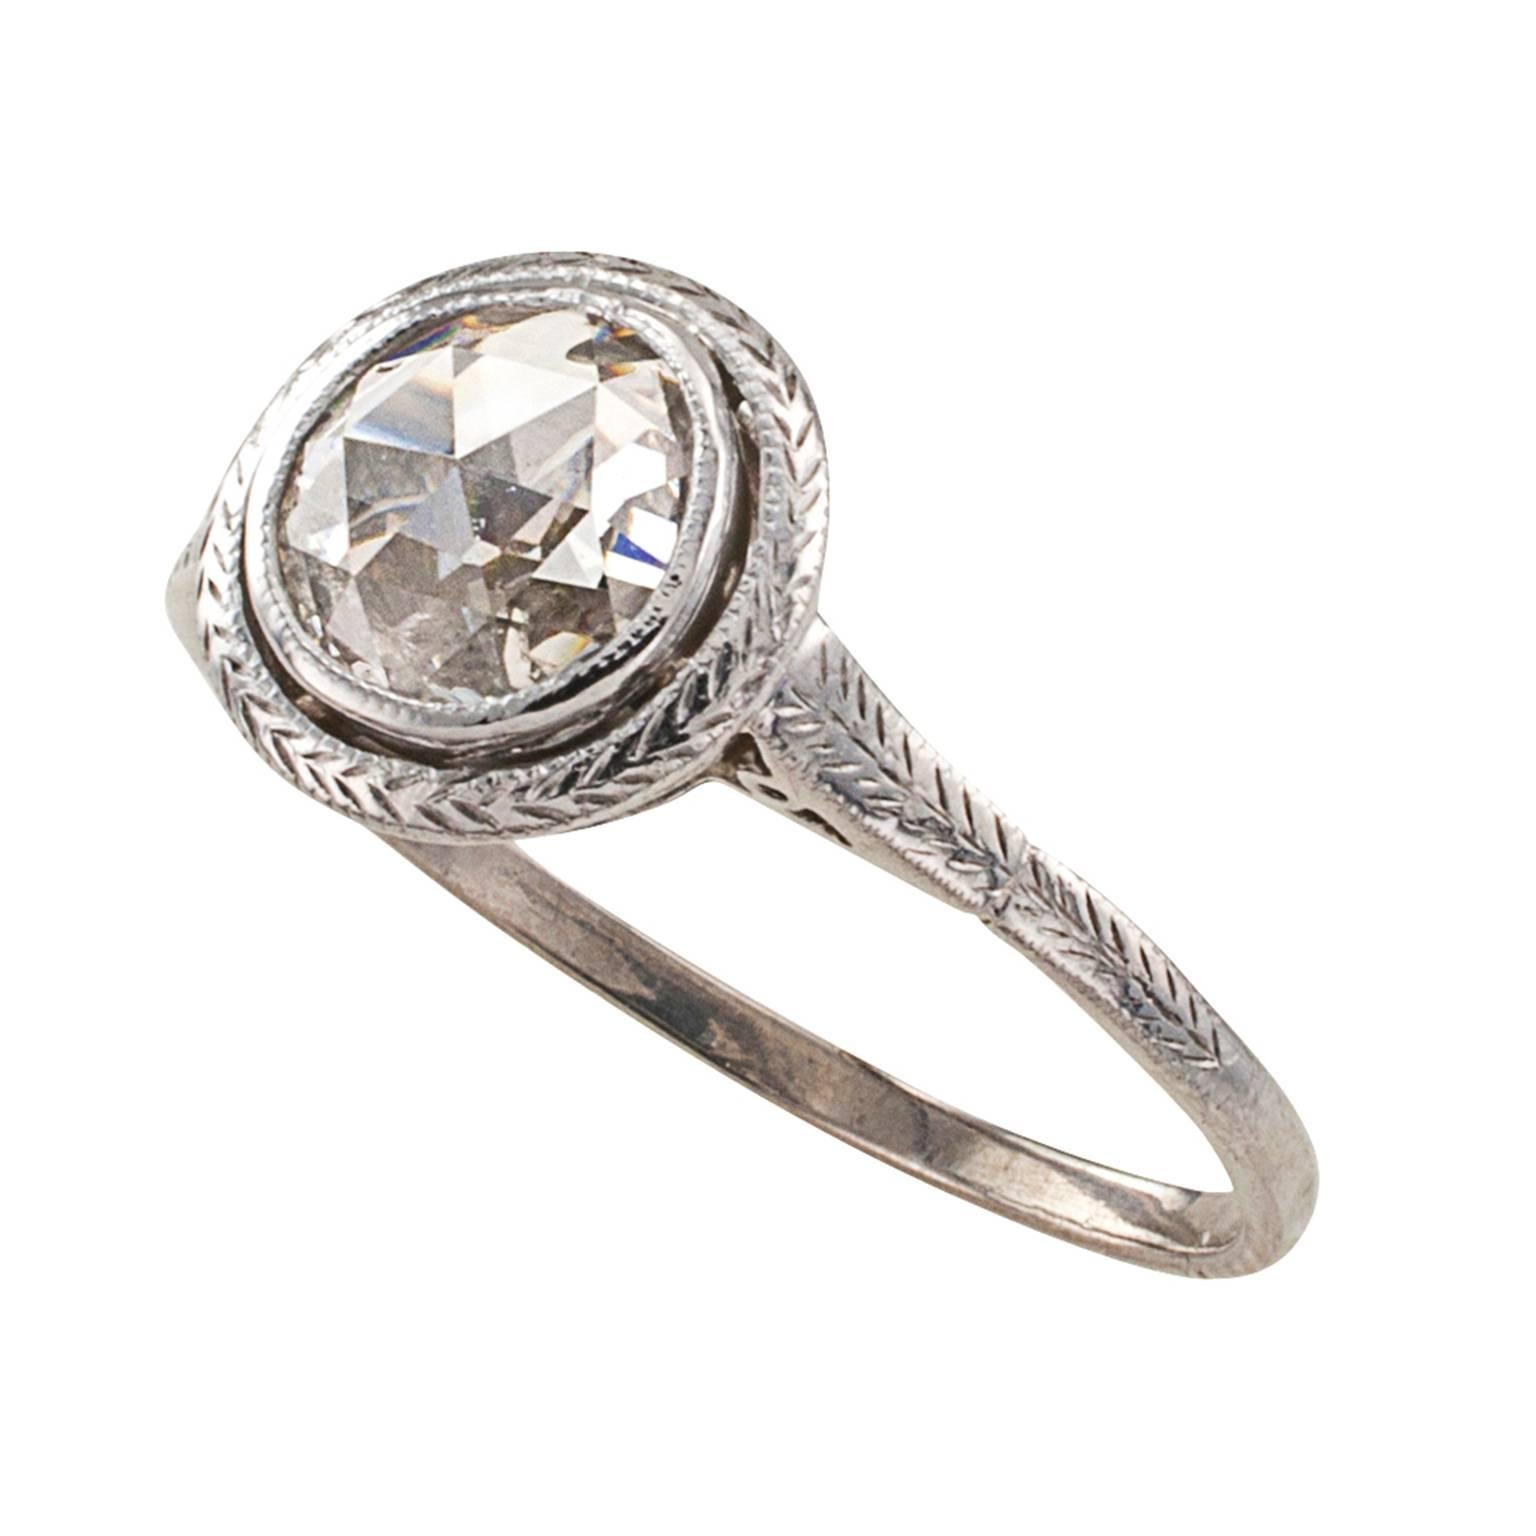 .60 Carat Rose-cut Diamond Solitaire Engagement Ring

The essence of simplicity and the thrill of an antique rose-cut diamond solitaire ring, not bad! The sort of thing that doesn't happen very often in genuine Edwardian engagement rings.  The